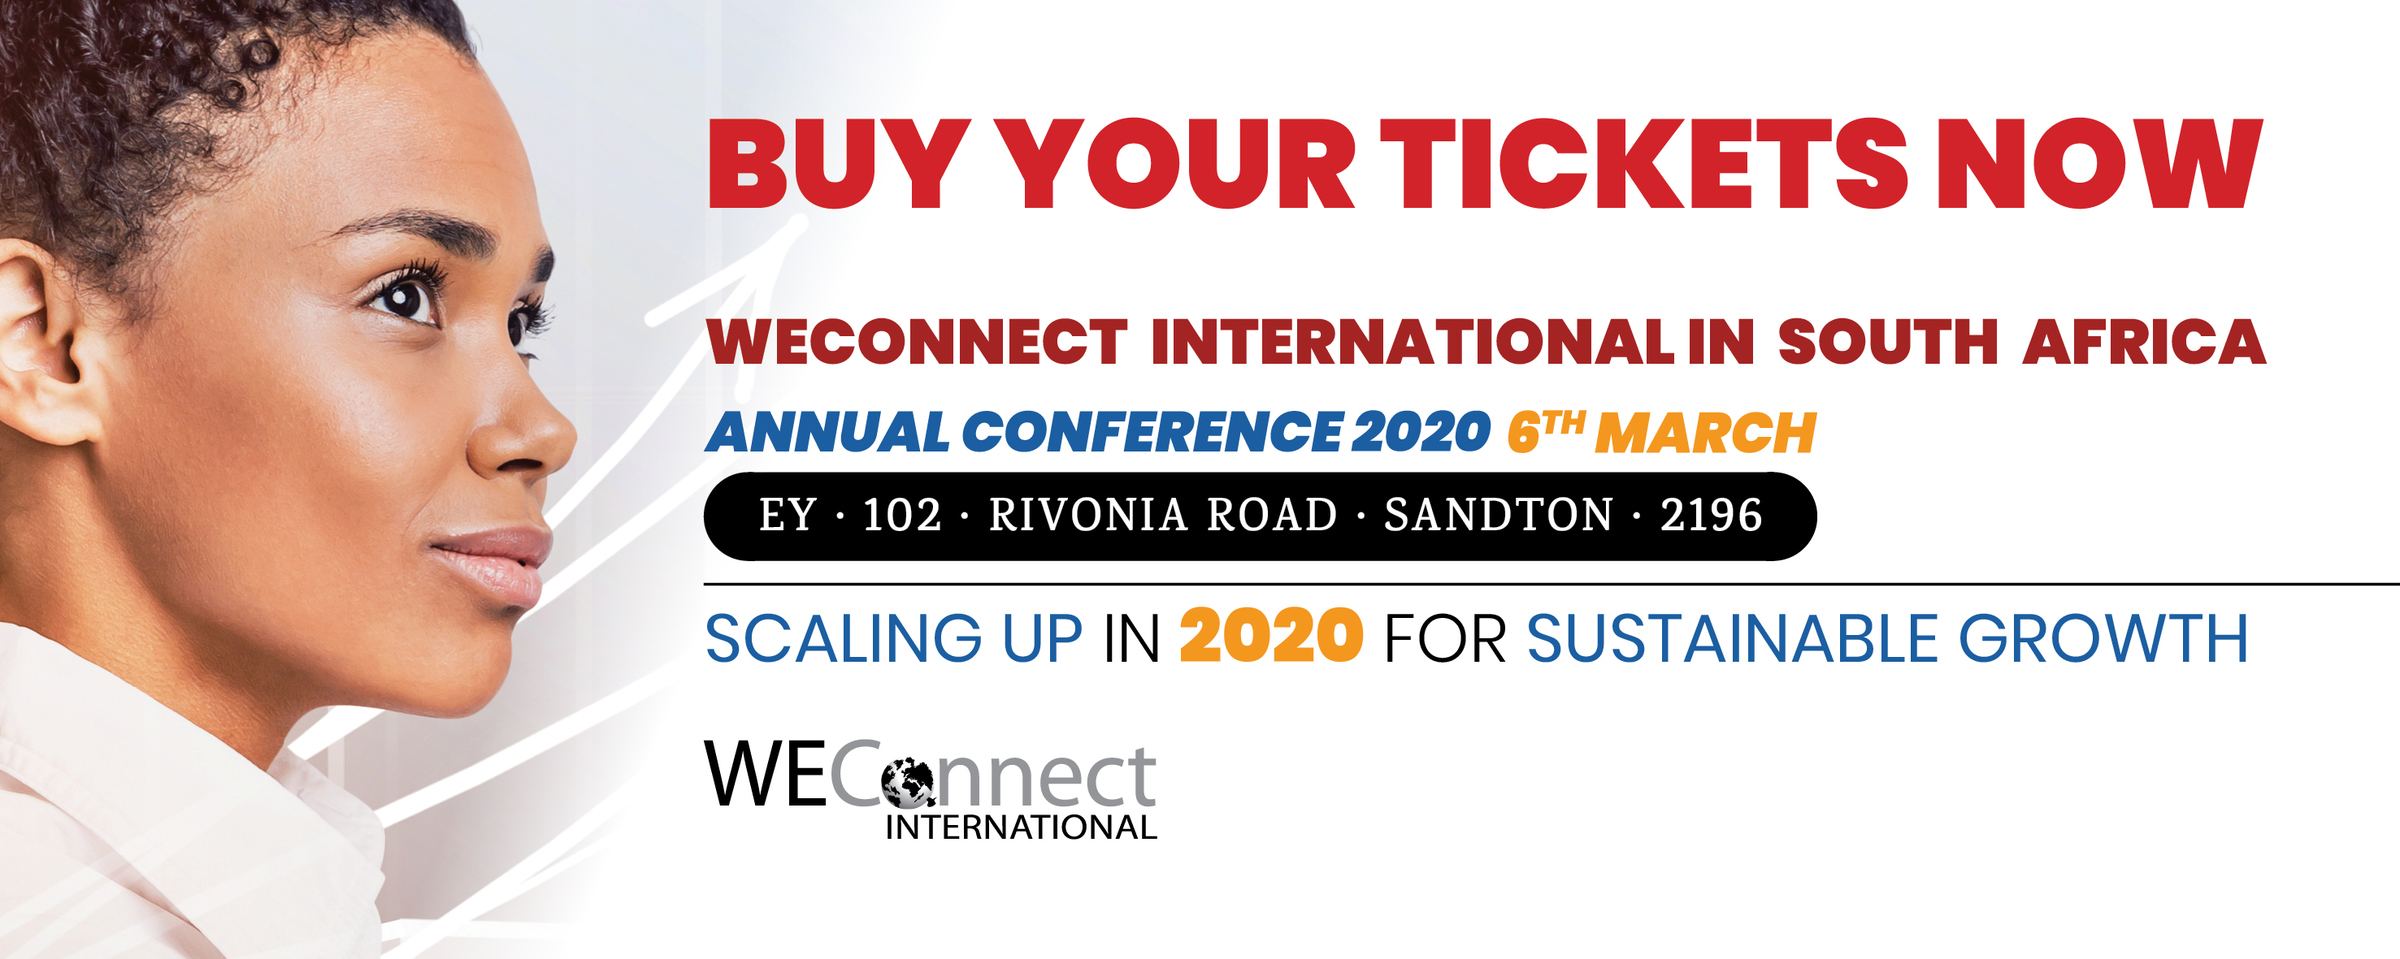 2020 WEConnect International in South Africa Annual Conference